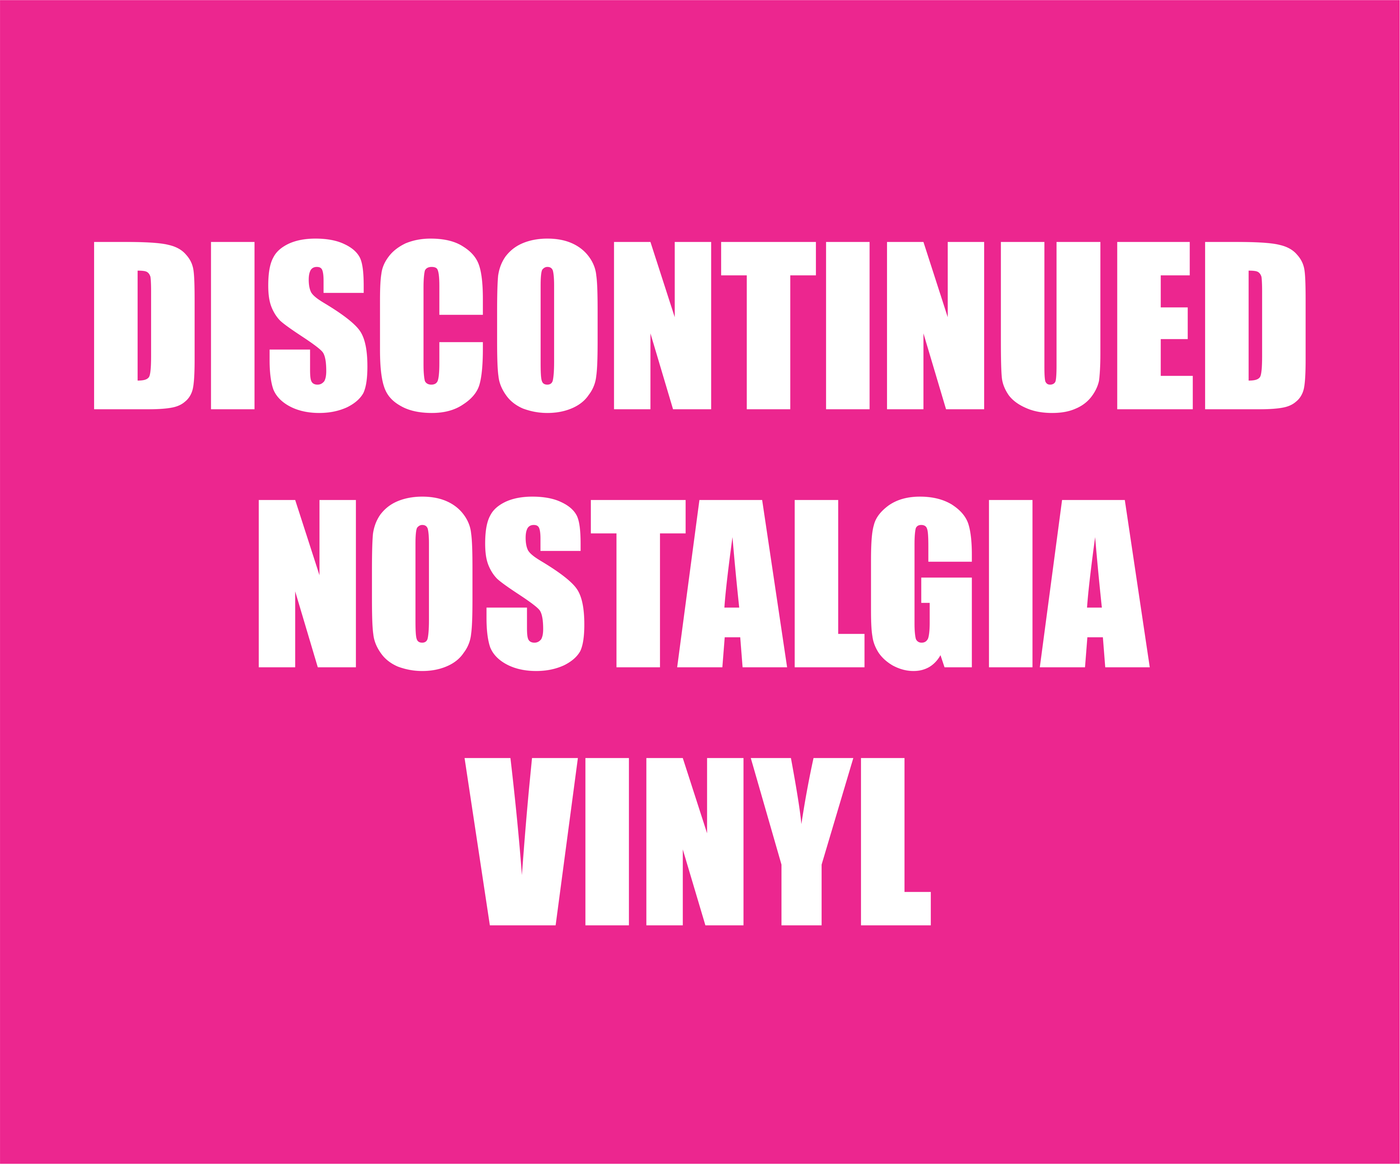 Adhesive Patterned Vinyl - Discontinued Nostallgia